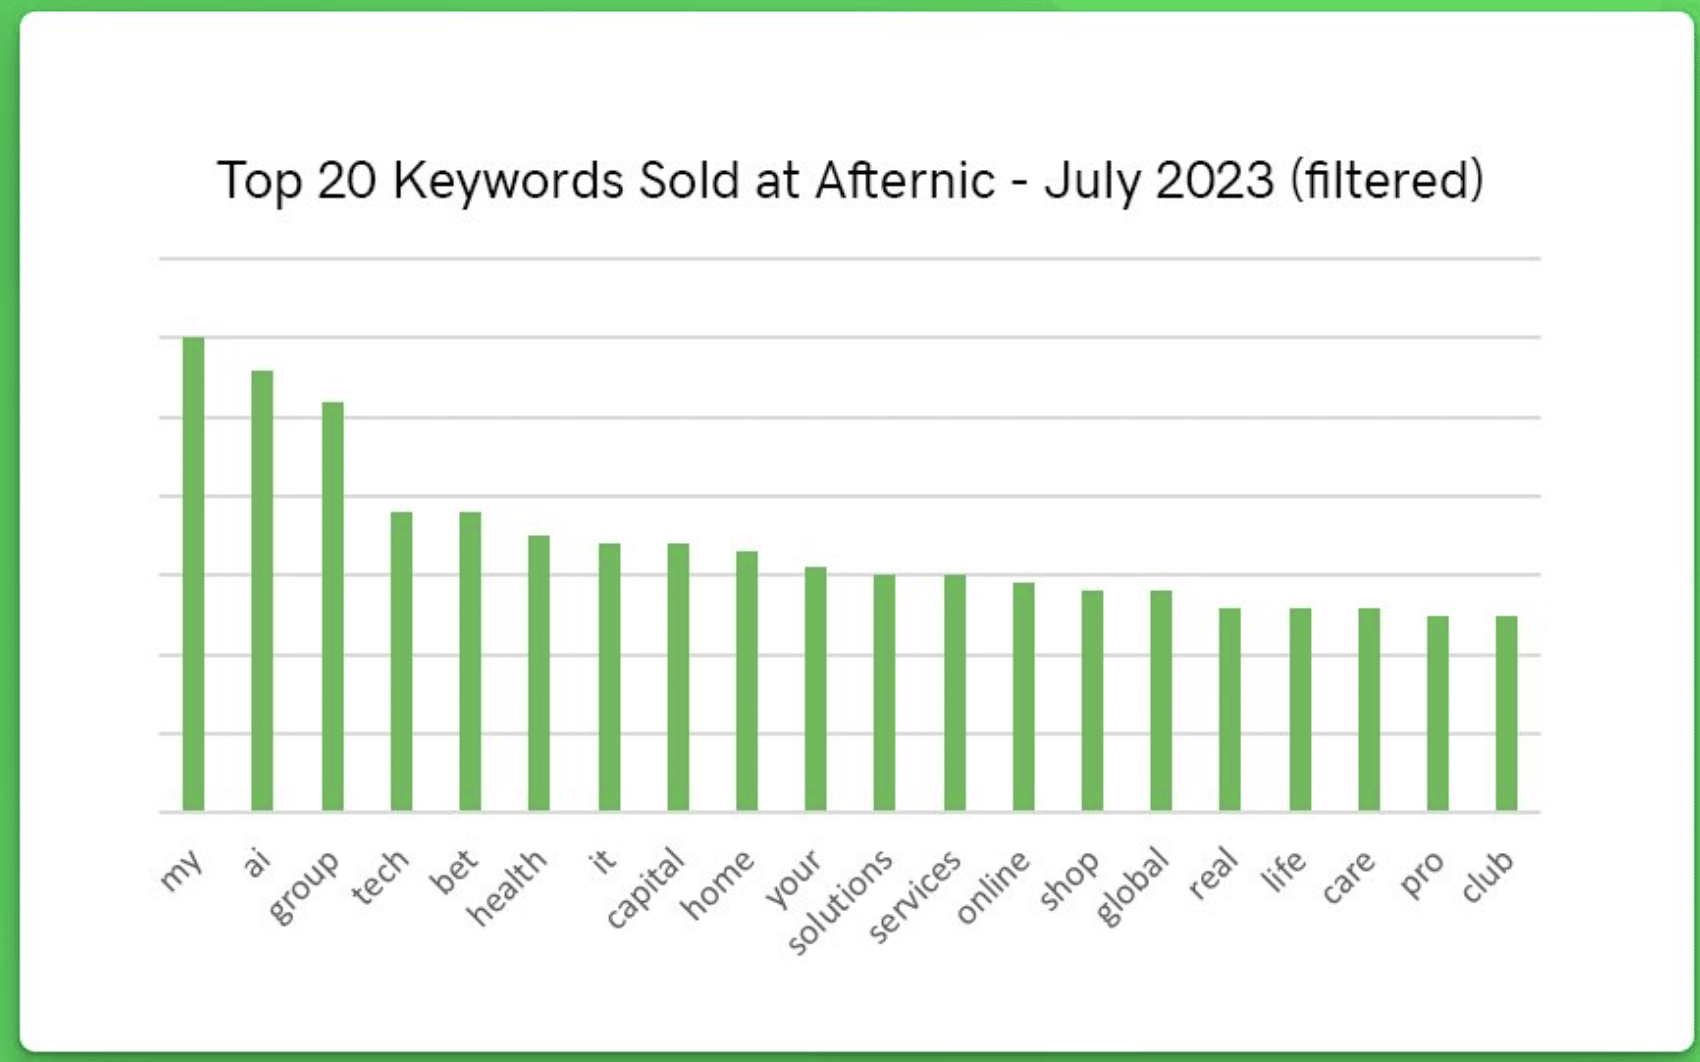 Chart showing top keyword sales on Afternic in July 2023, in order: my (#1 in June)ai (2)
group (3)
tech (6)
bet (5)
health (9)
it
capital (14)
home (4)
your (13)
solutions (20)
services
online
shop (10)
global (16)
real
life (7)
care
pro (8)
club